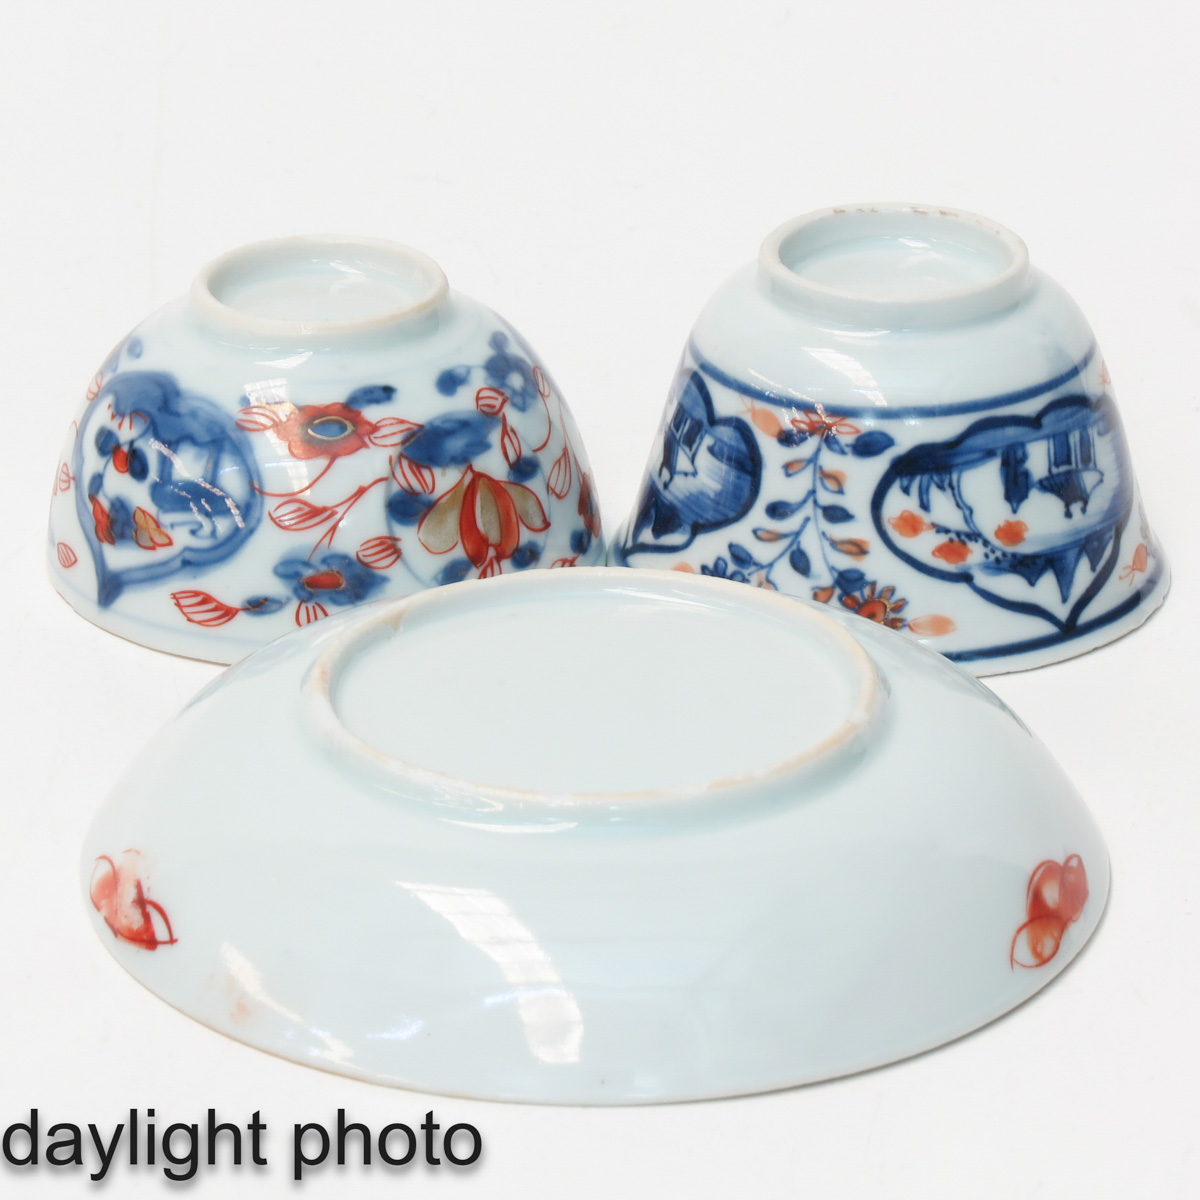 A Series of 6 Cups and Saucers - Image 10 of 10